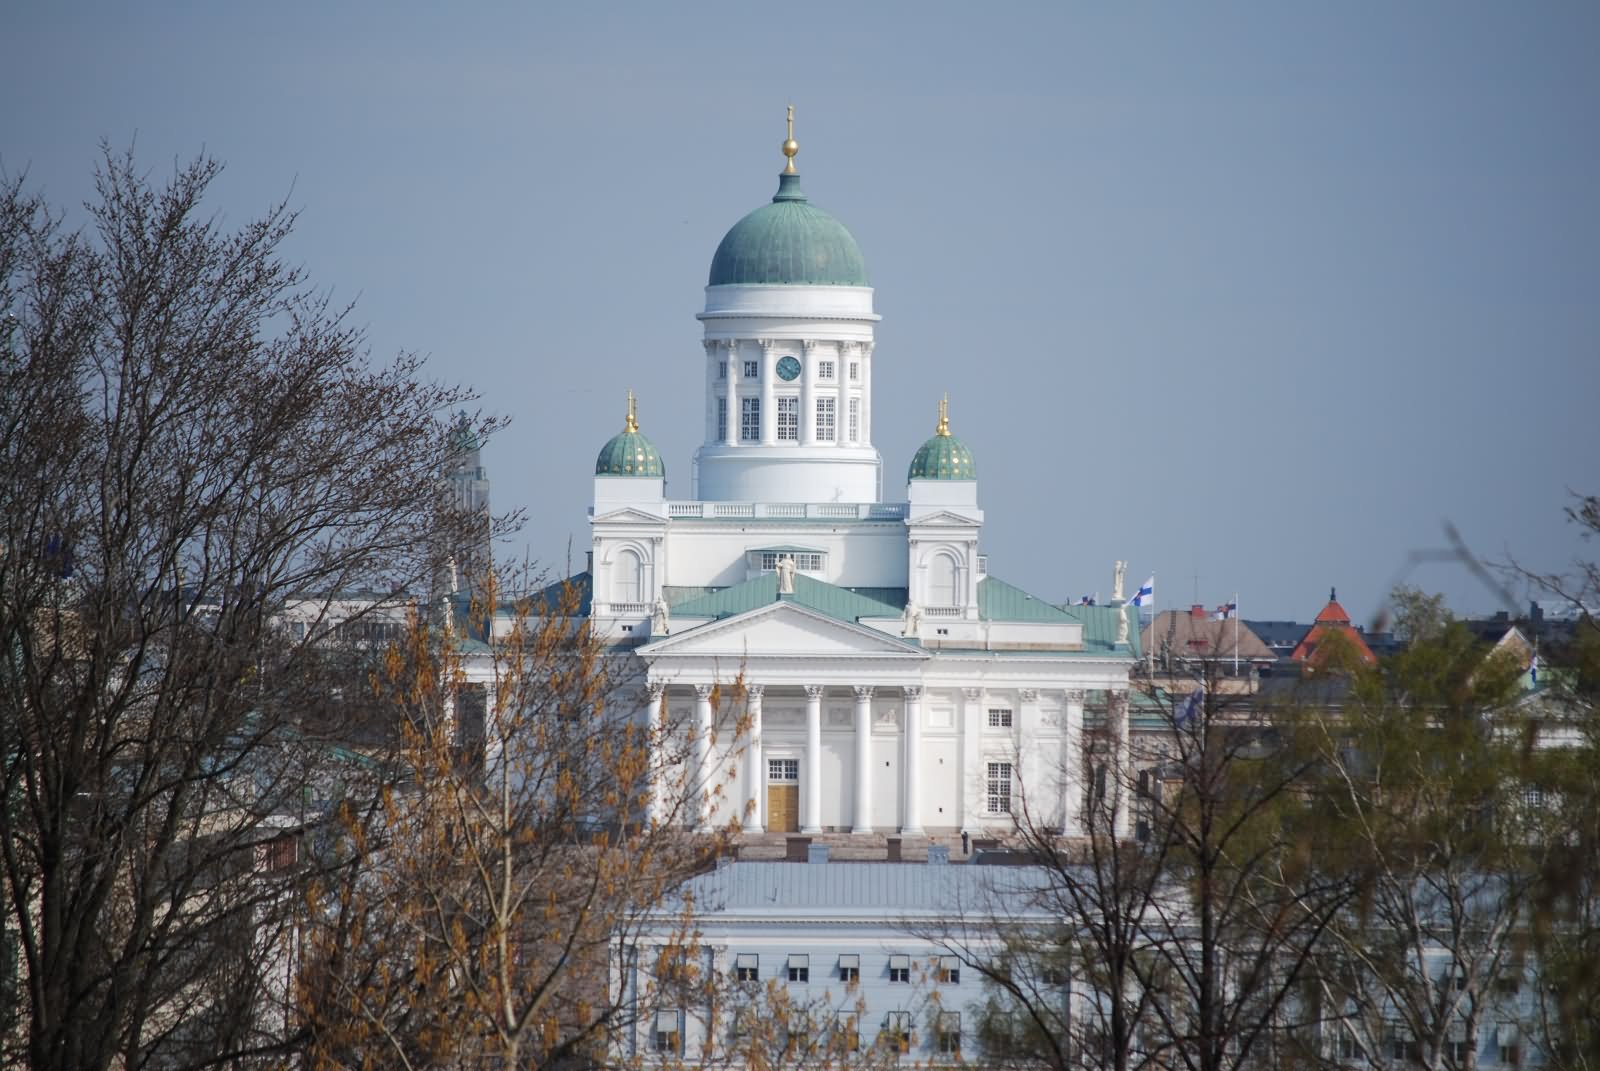 Beautiful Picture Of The Helsinki Cathedral In Finland